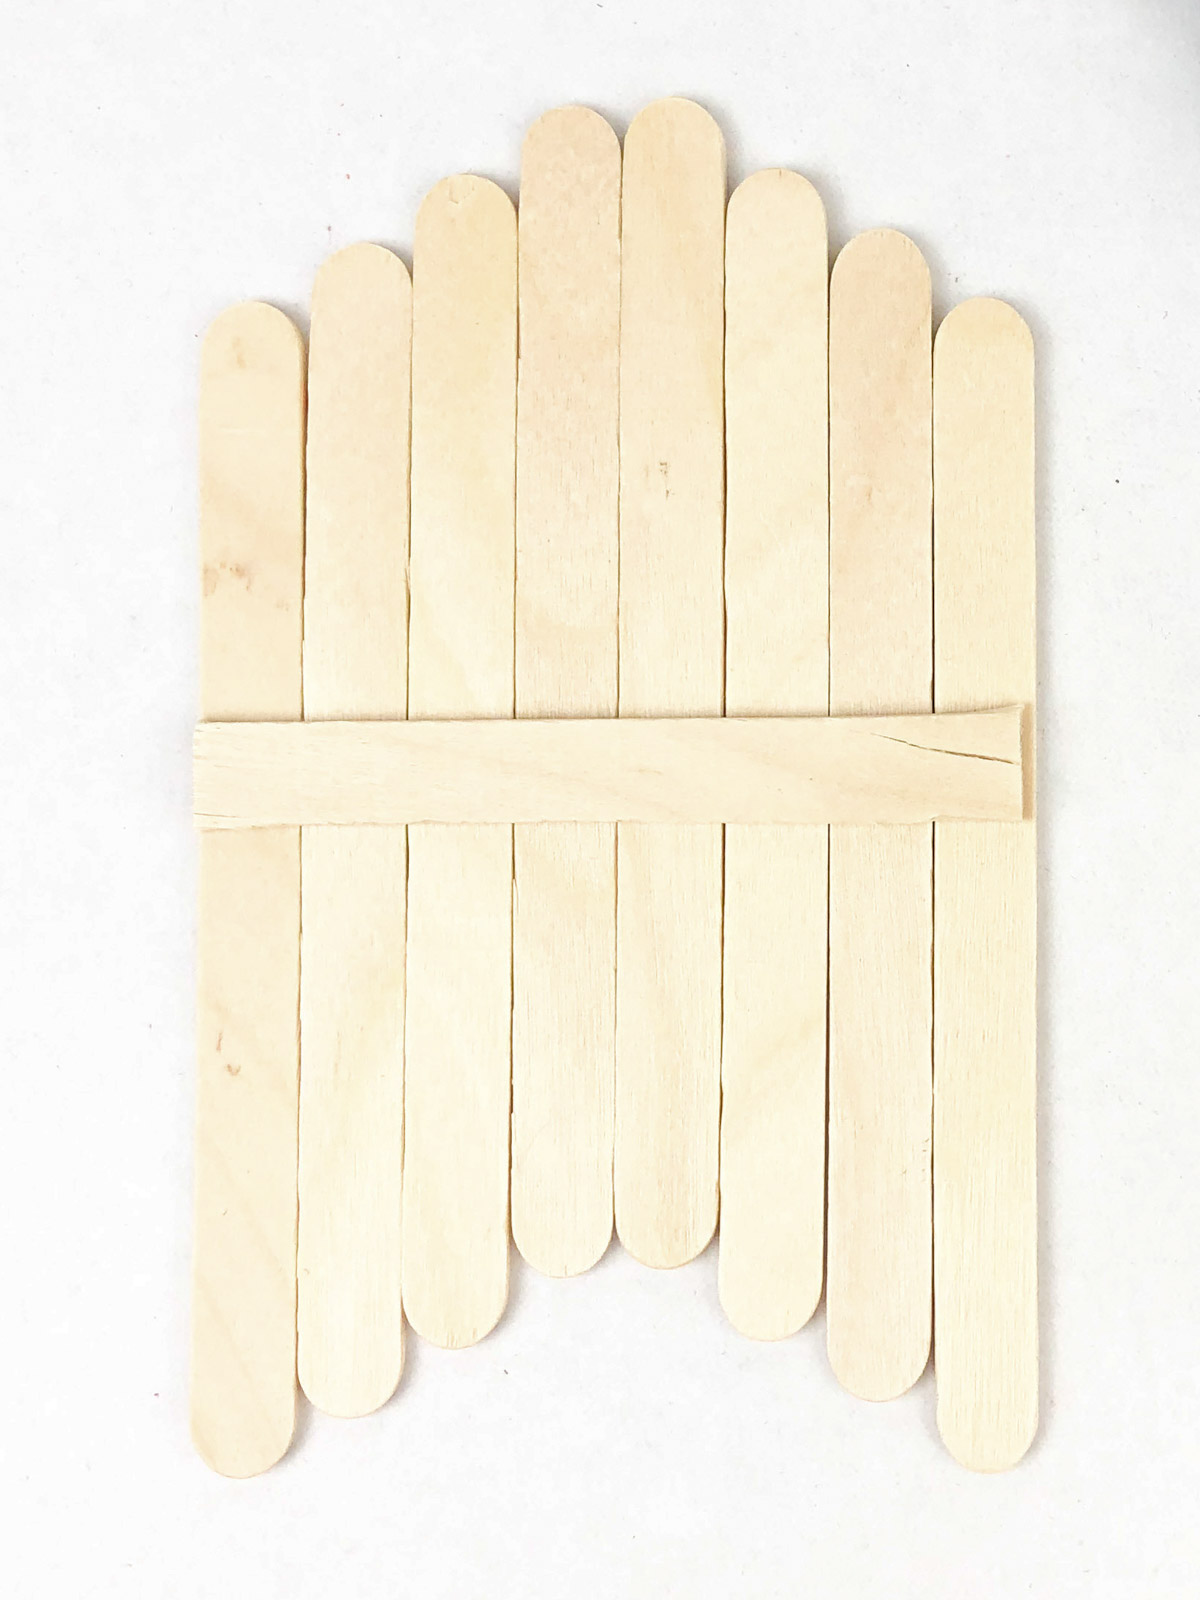 popsicle sticks lined up with one on the back